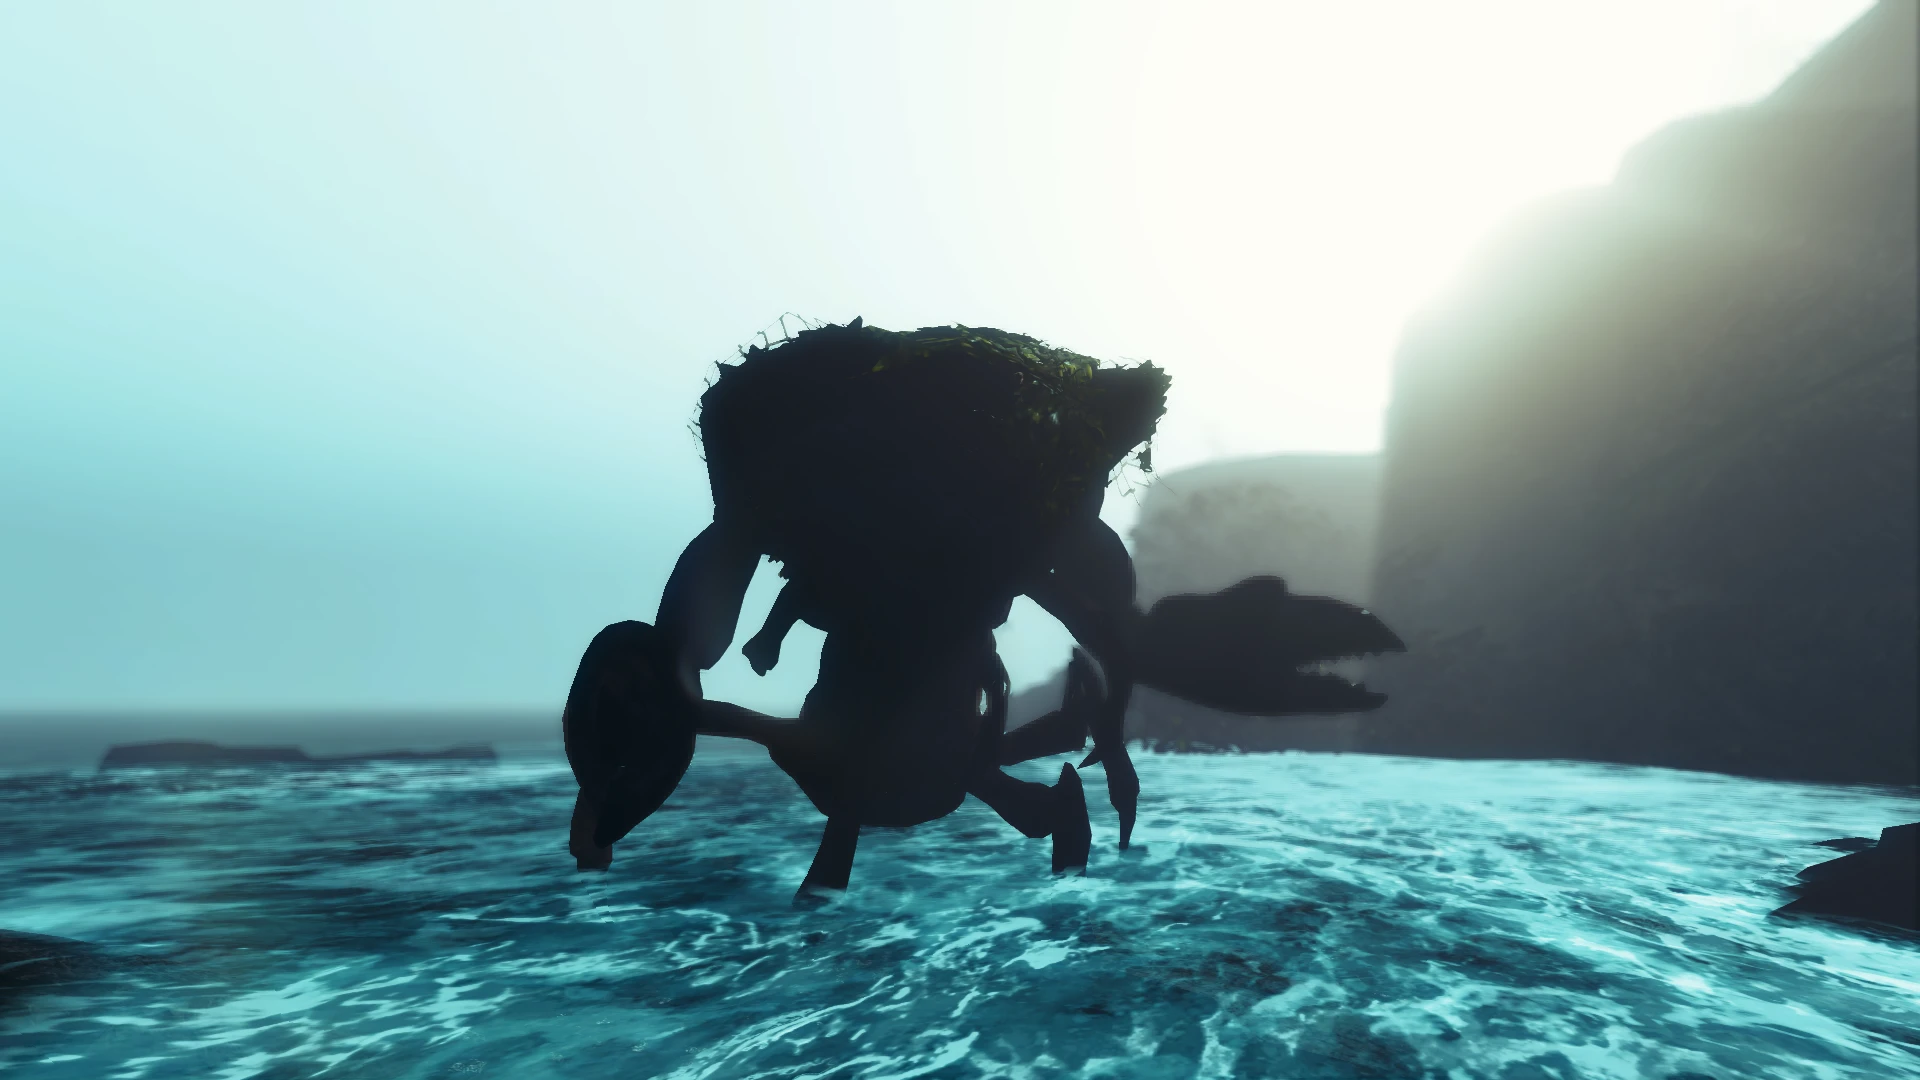 Mutant Menagerie - Horrors of the Deep Fog (Legacy) at Fallout 4 Nexus -  Mods and community